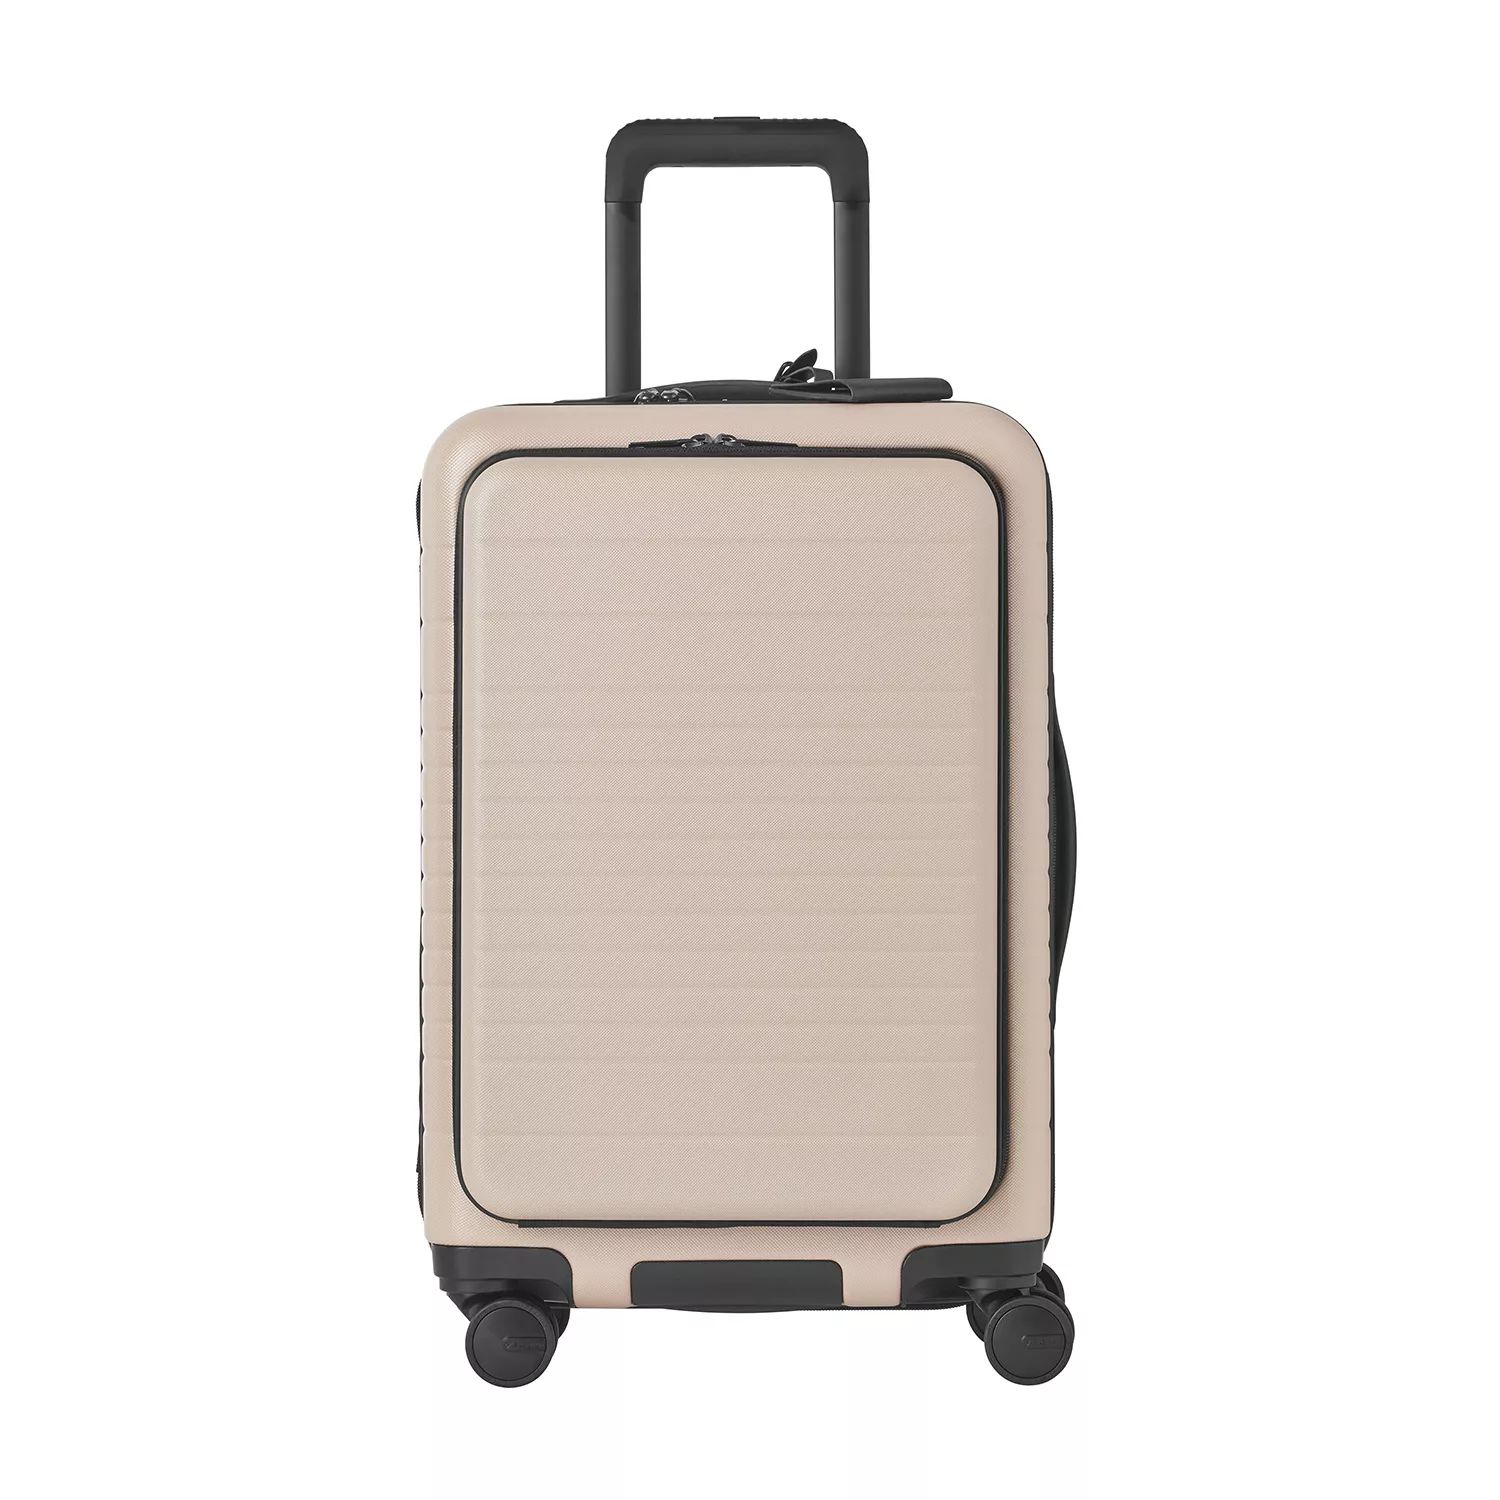 Member's Mark Hardside Carry-on Pro Spinner Suitcase With USB (Assorted Colors) | Sam's Club